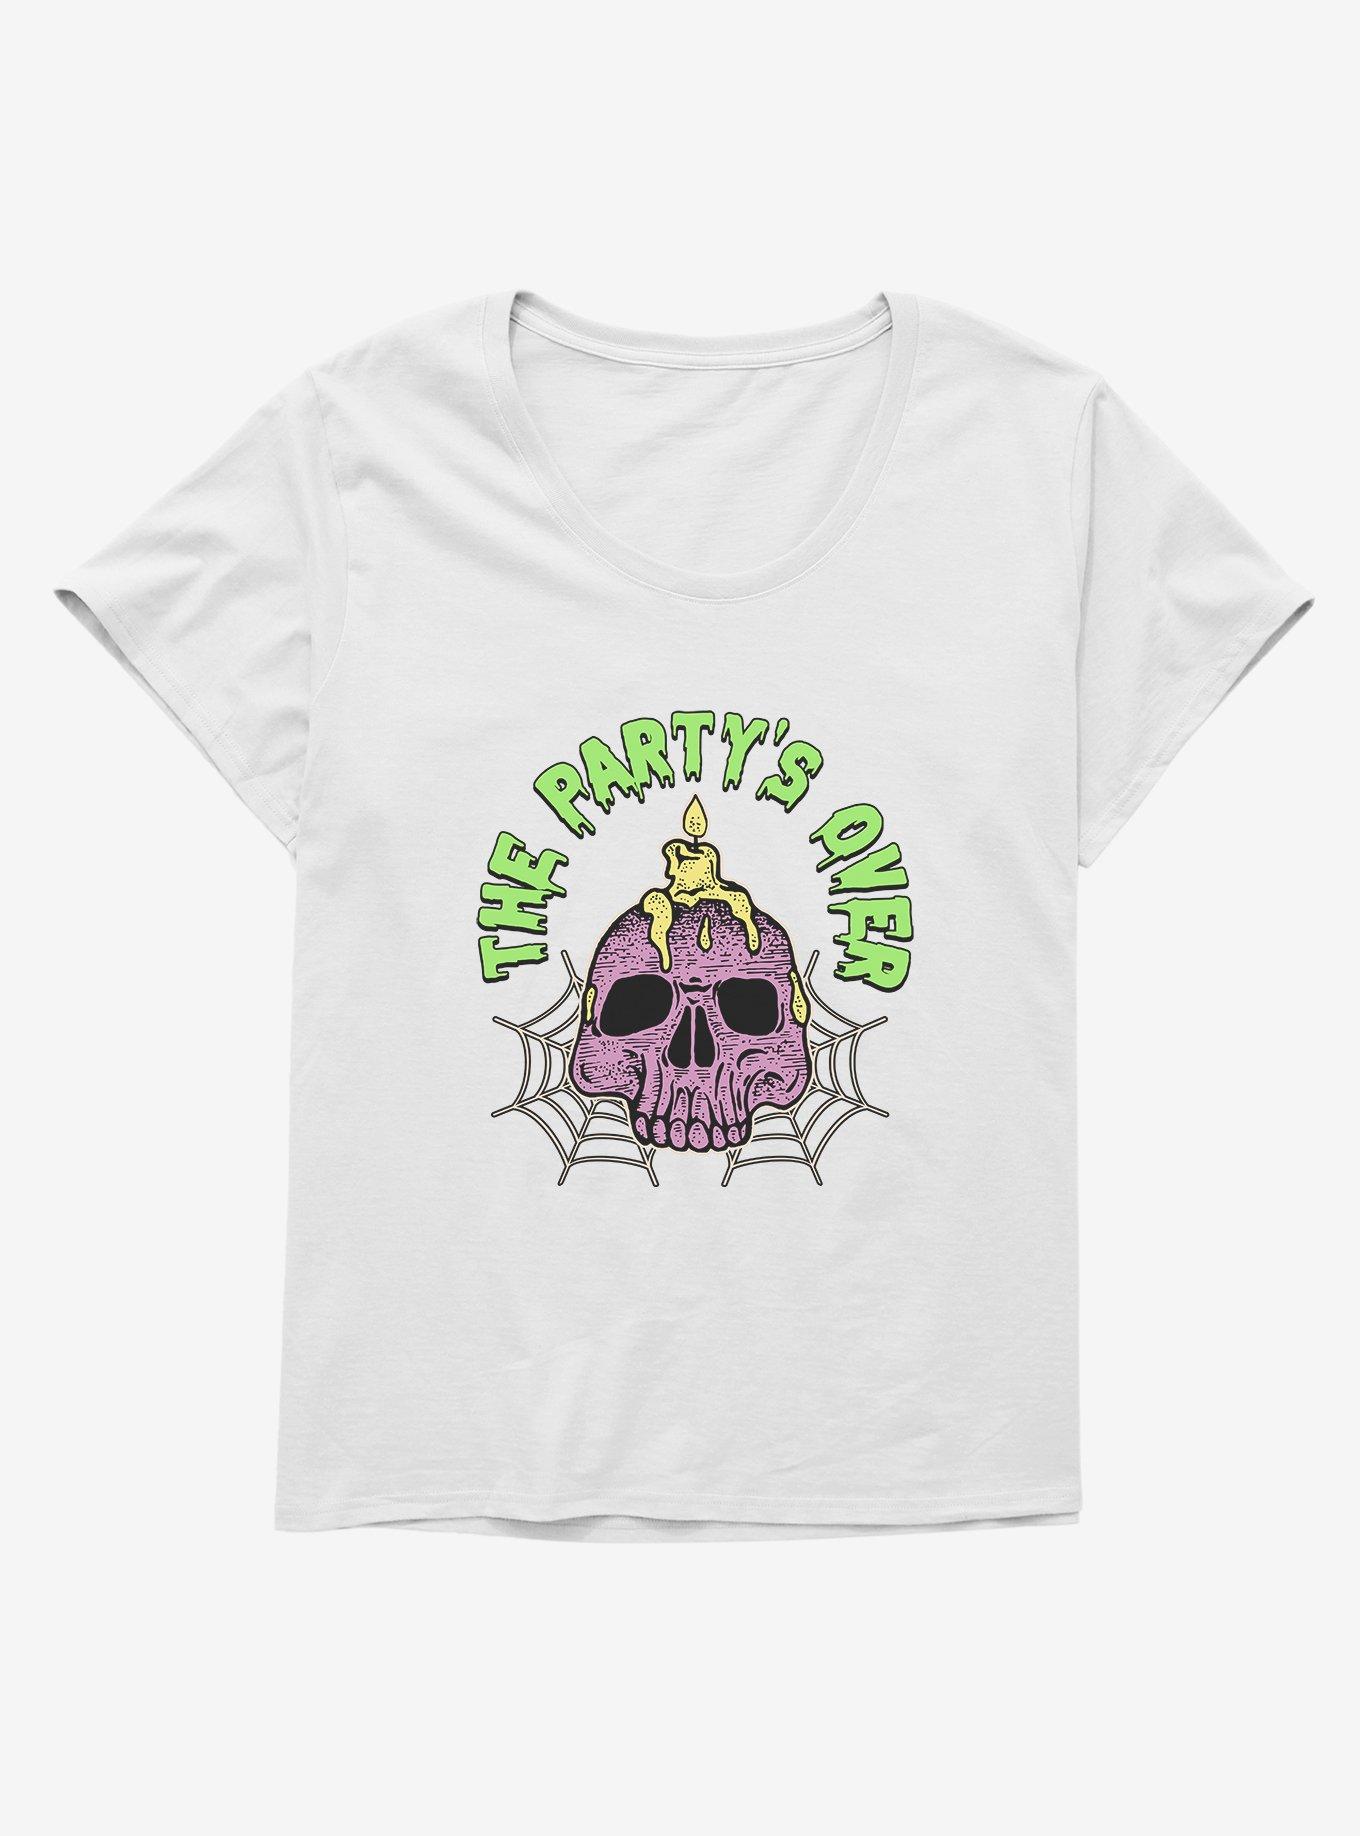 Halloween Party'S Over Plus Size T-Shirt, WHITE, hi-res